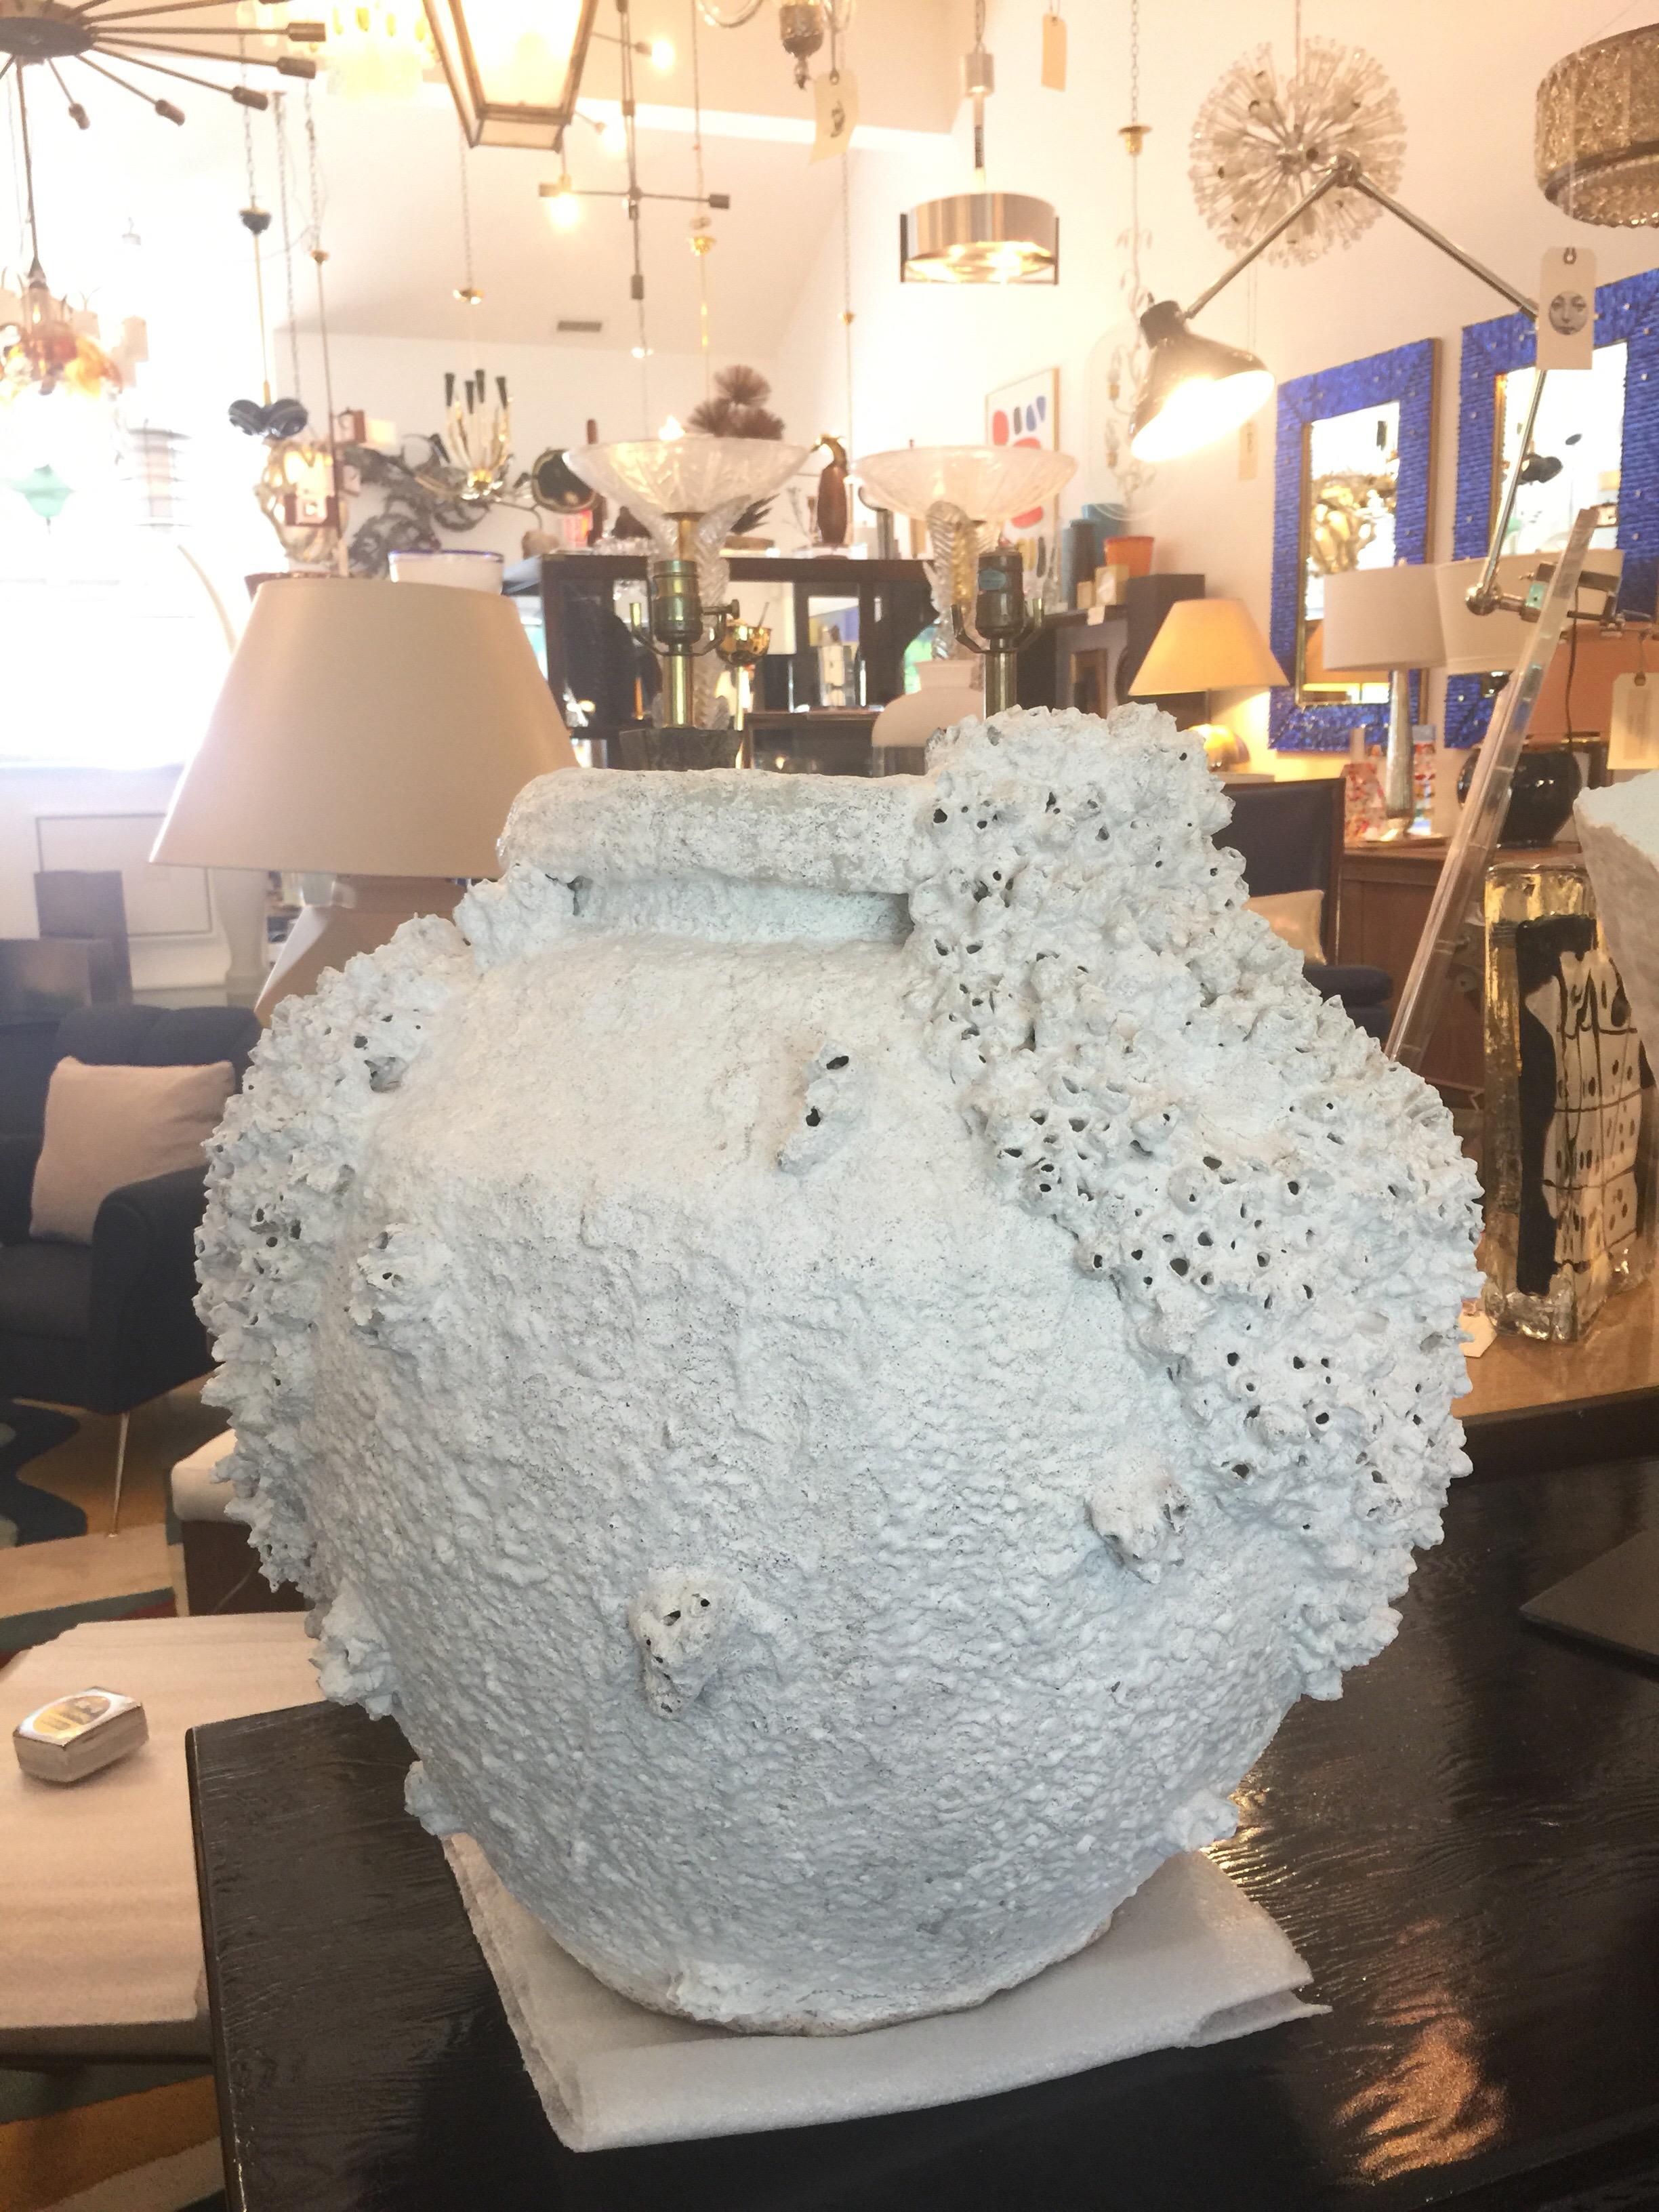 This very large and all natural vessel has encrusted clusters of sea sponge and barnacles - it is an off-white tone. Very heavy and amazing! Rich in texture and sculptural.